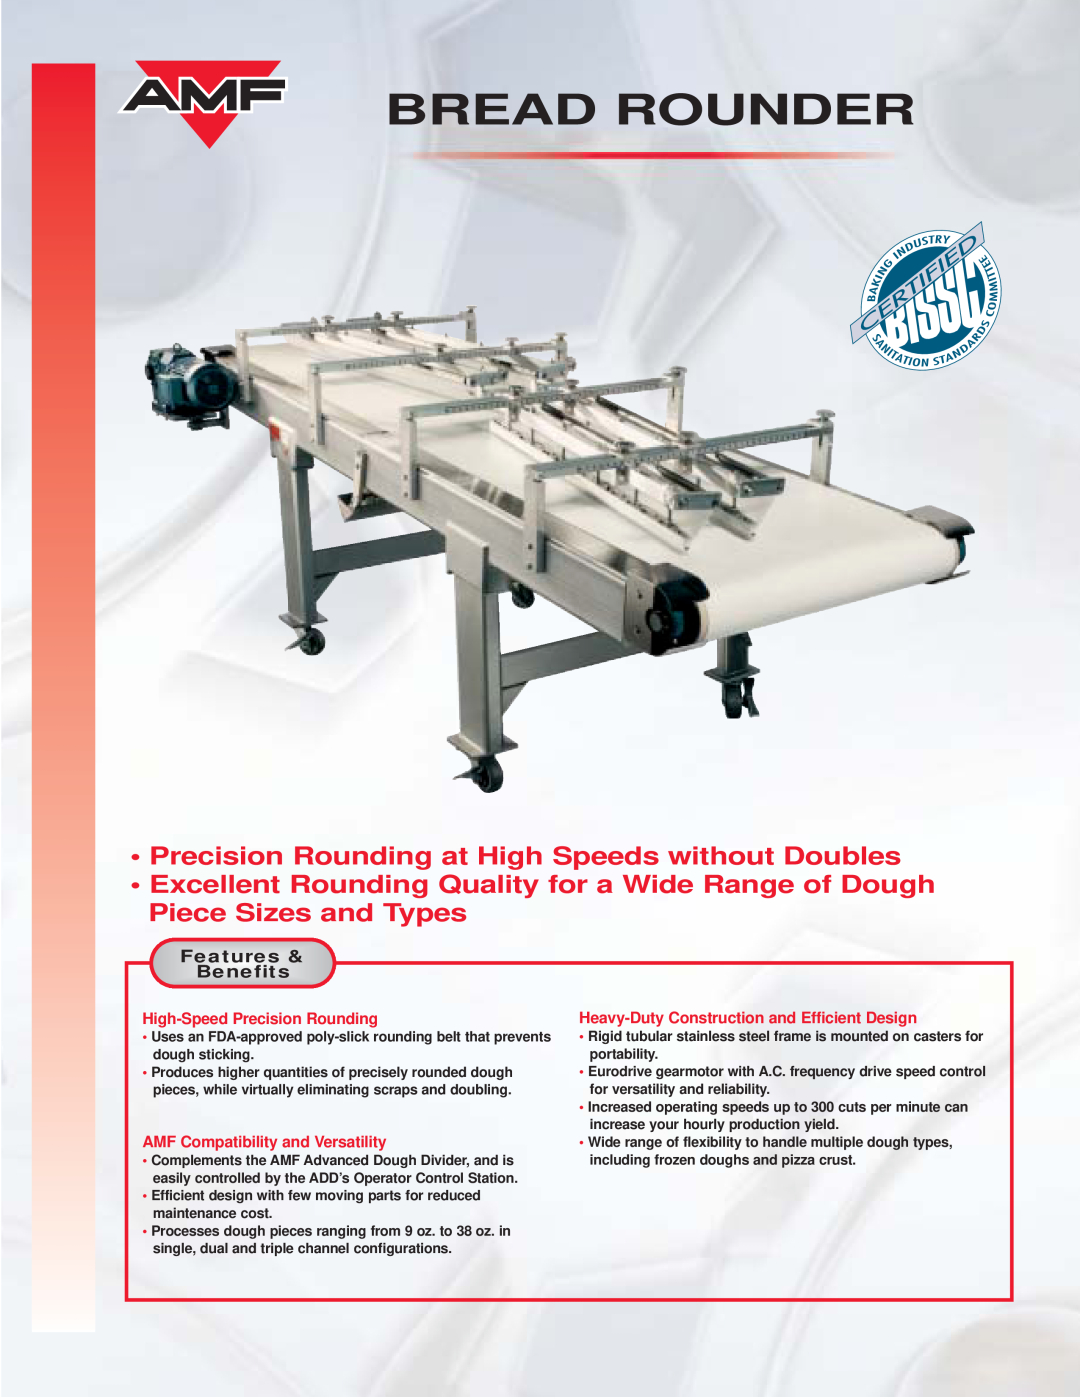 AMF Bread Bounder manual Bread Rounder, Features, Benefits 